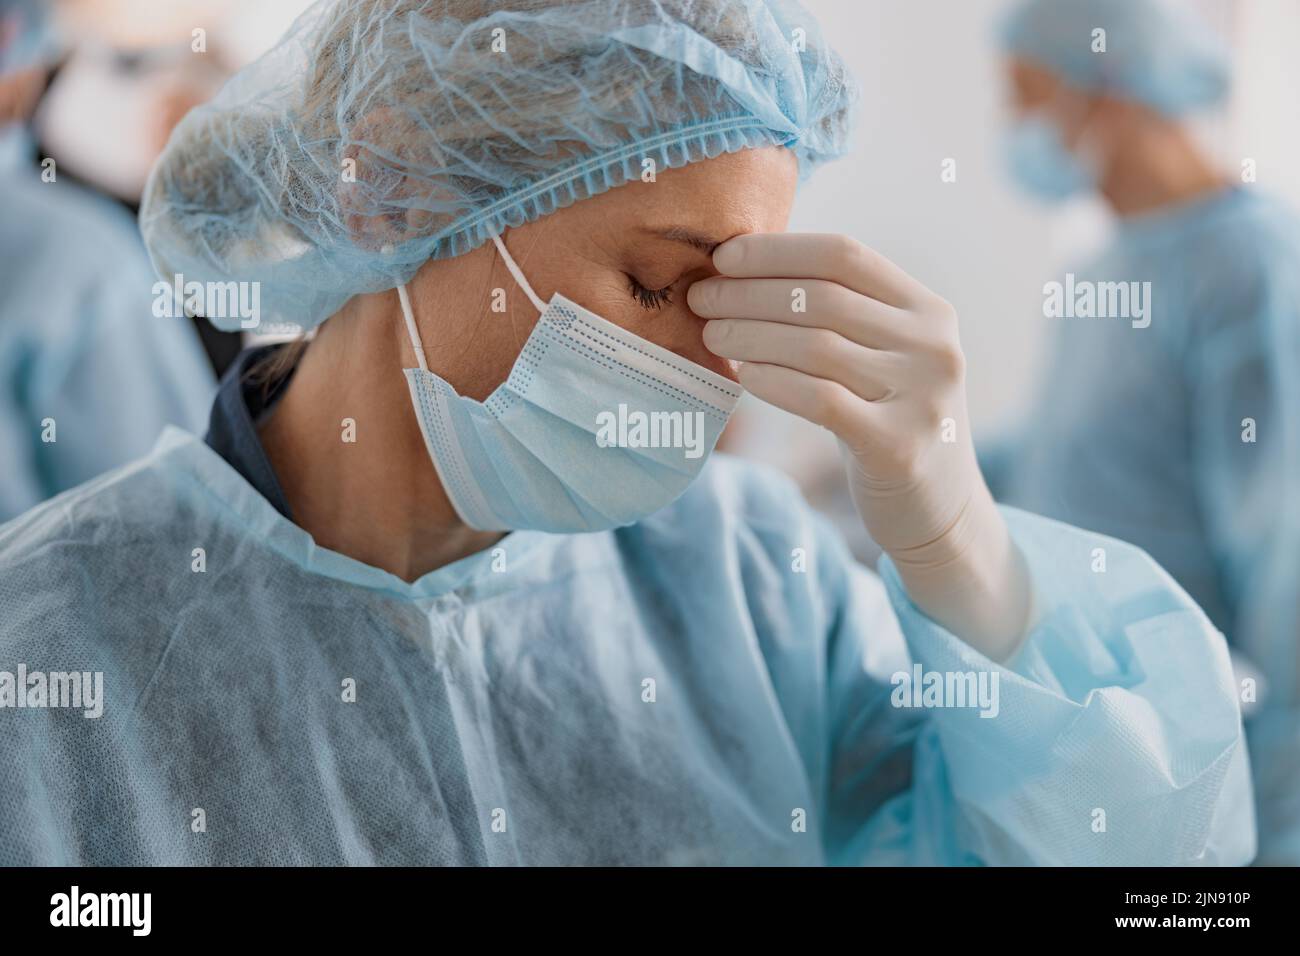 Professional tired surgeon in mask standing in operating room after major surgery Stock Photo